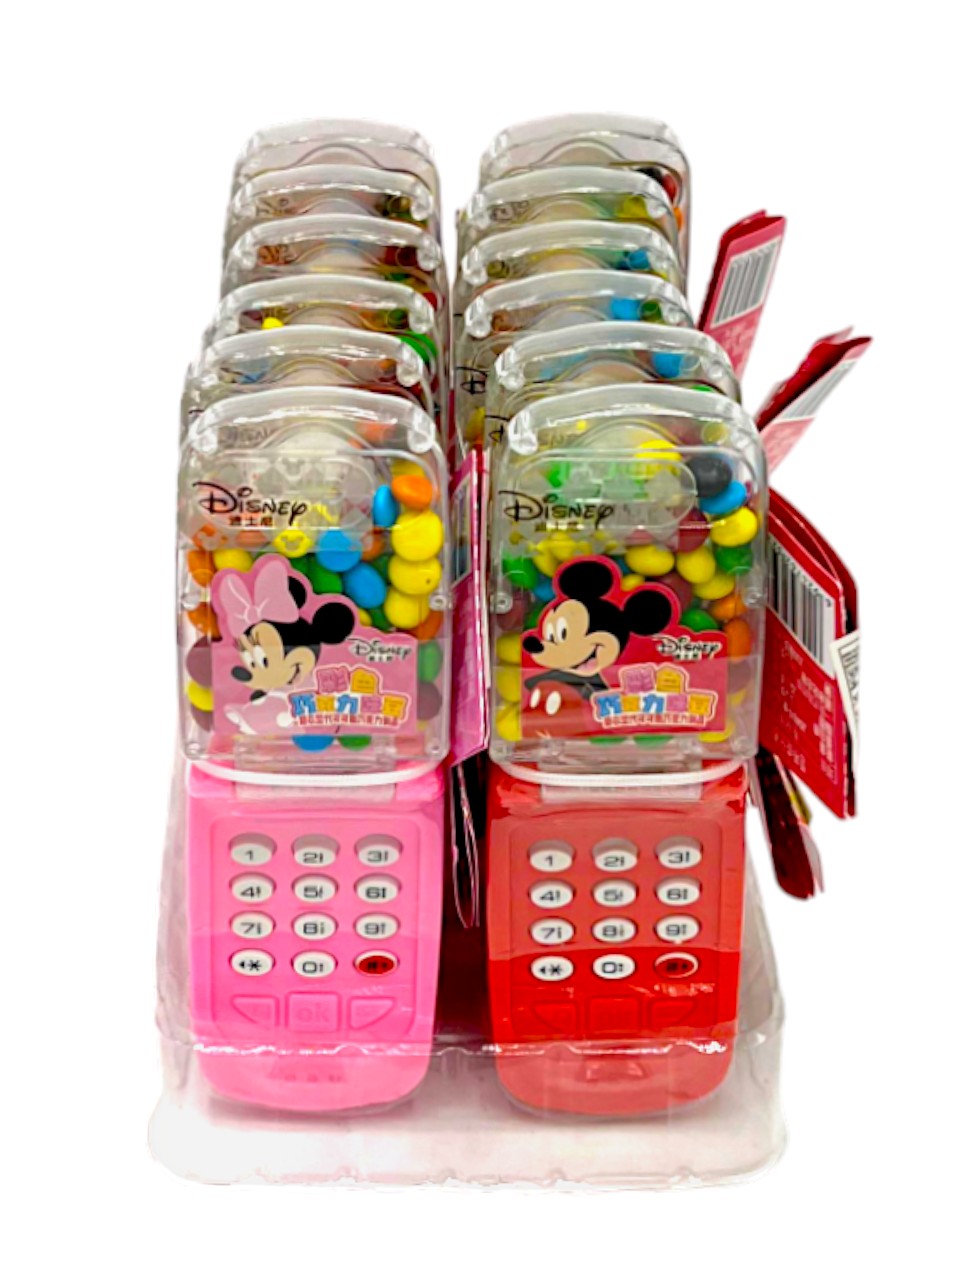 BInQi Disney Chocolate Beans Toy Phone w/ Sound Effects Pack of 12 (China)